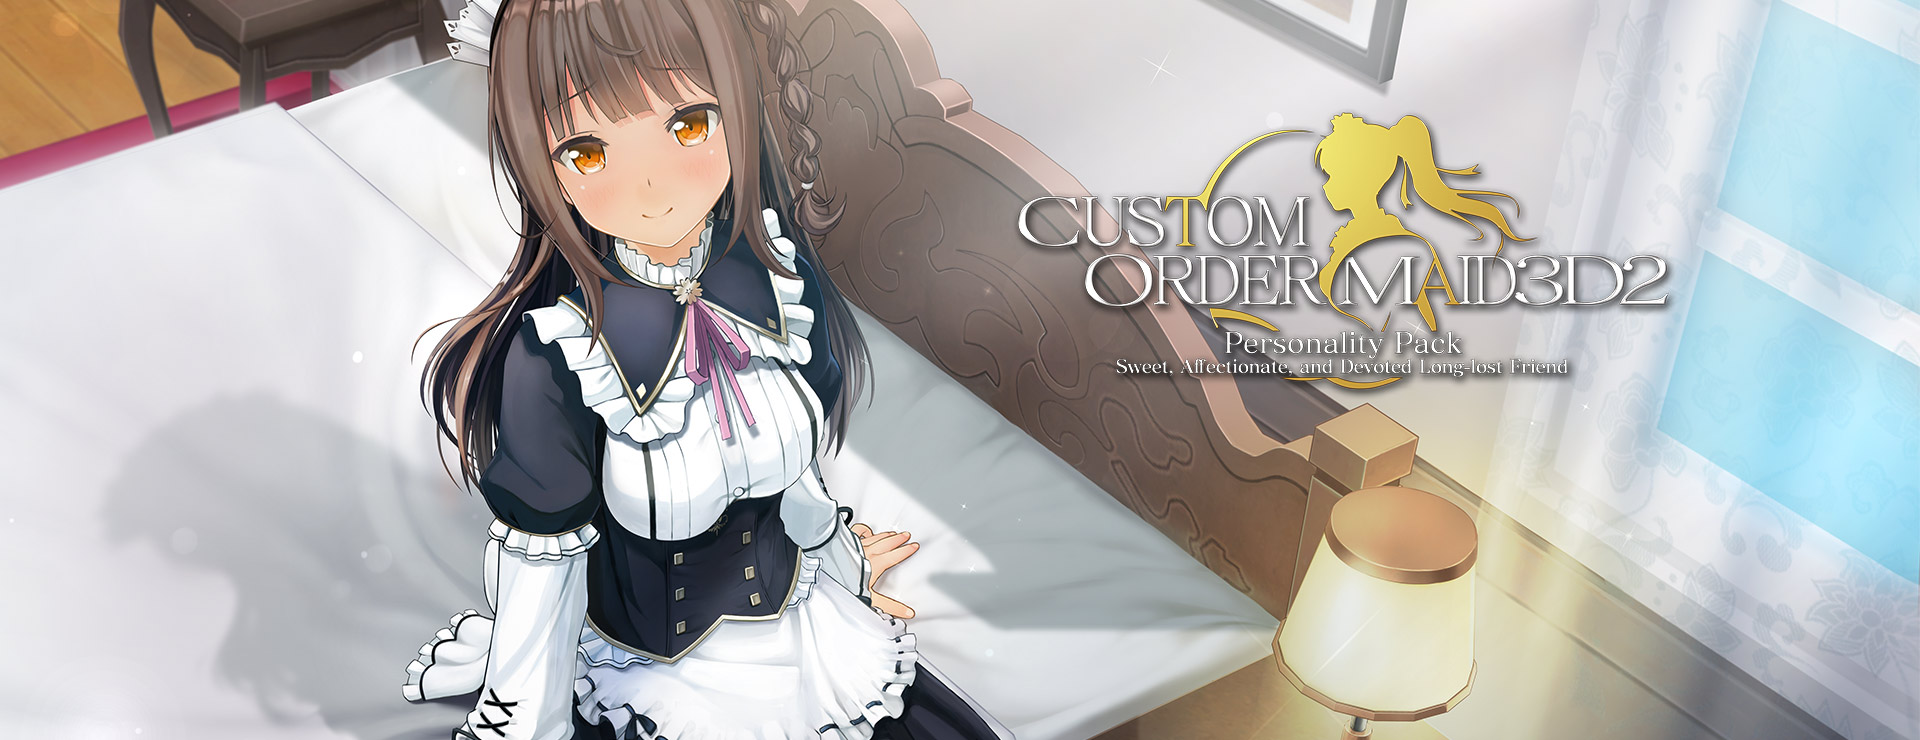 Custom Order Maid 3D 2 - Sweet, Affectionate, and Devoted Long-Lost Friend DLC - Simulation Spiel